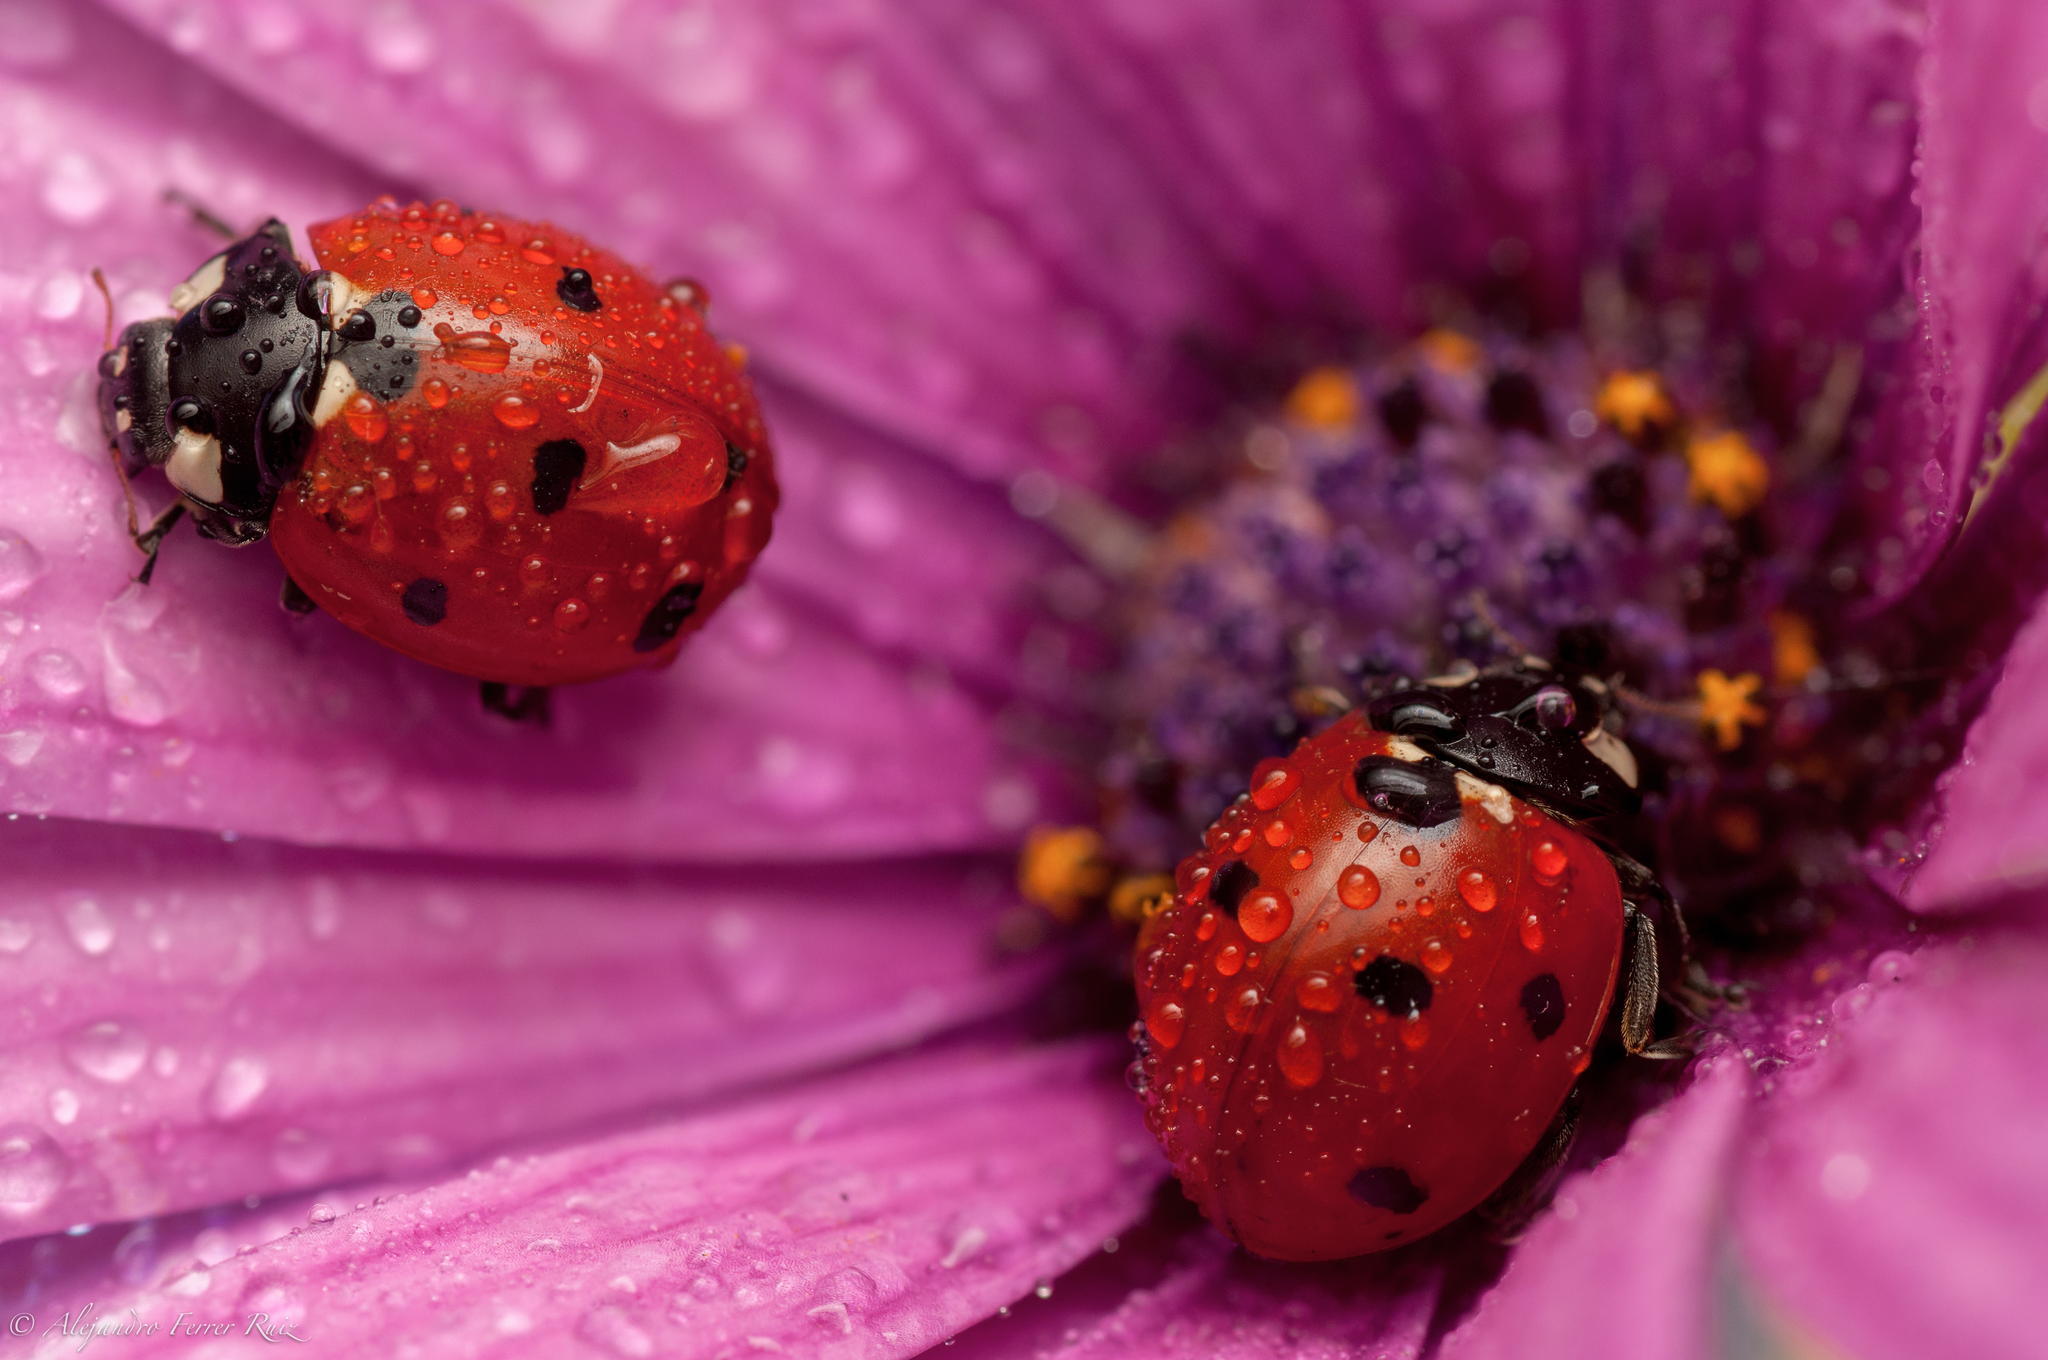 Ladybugs covered in dew on a pink flower.